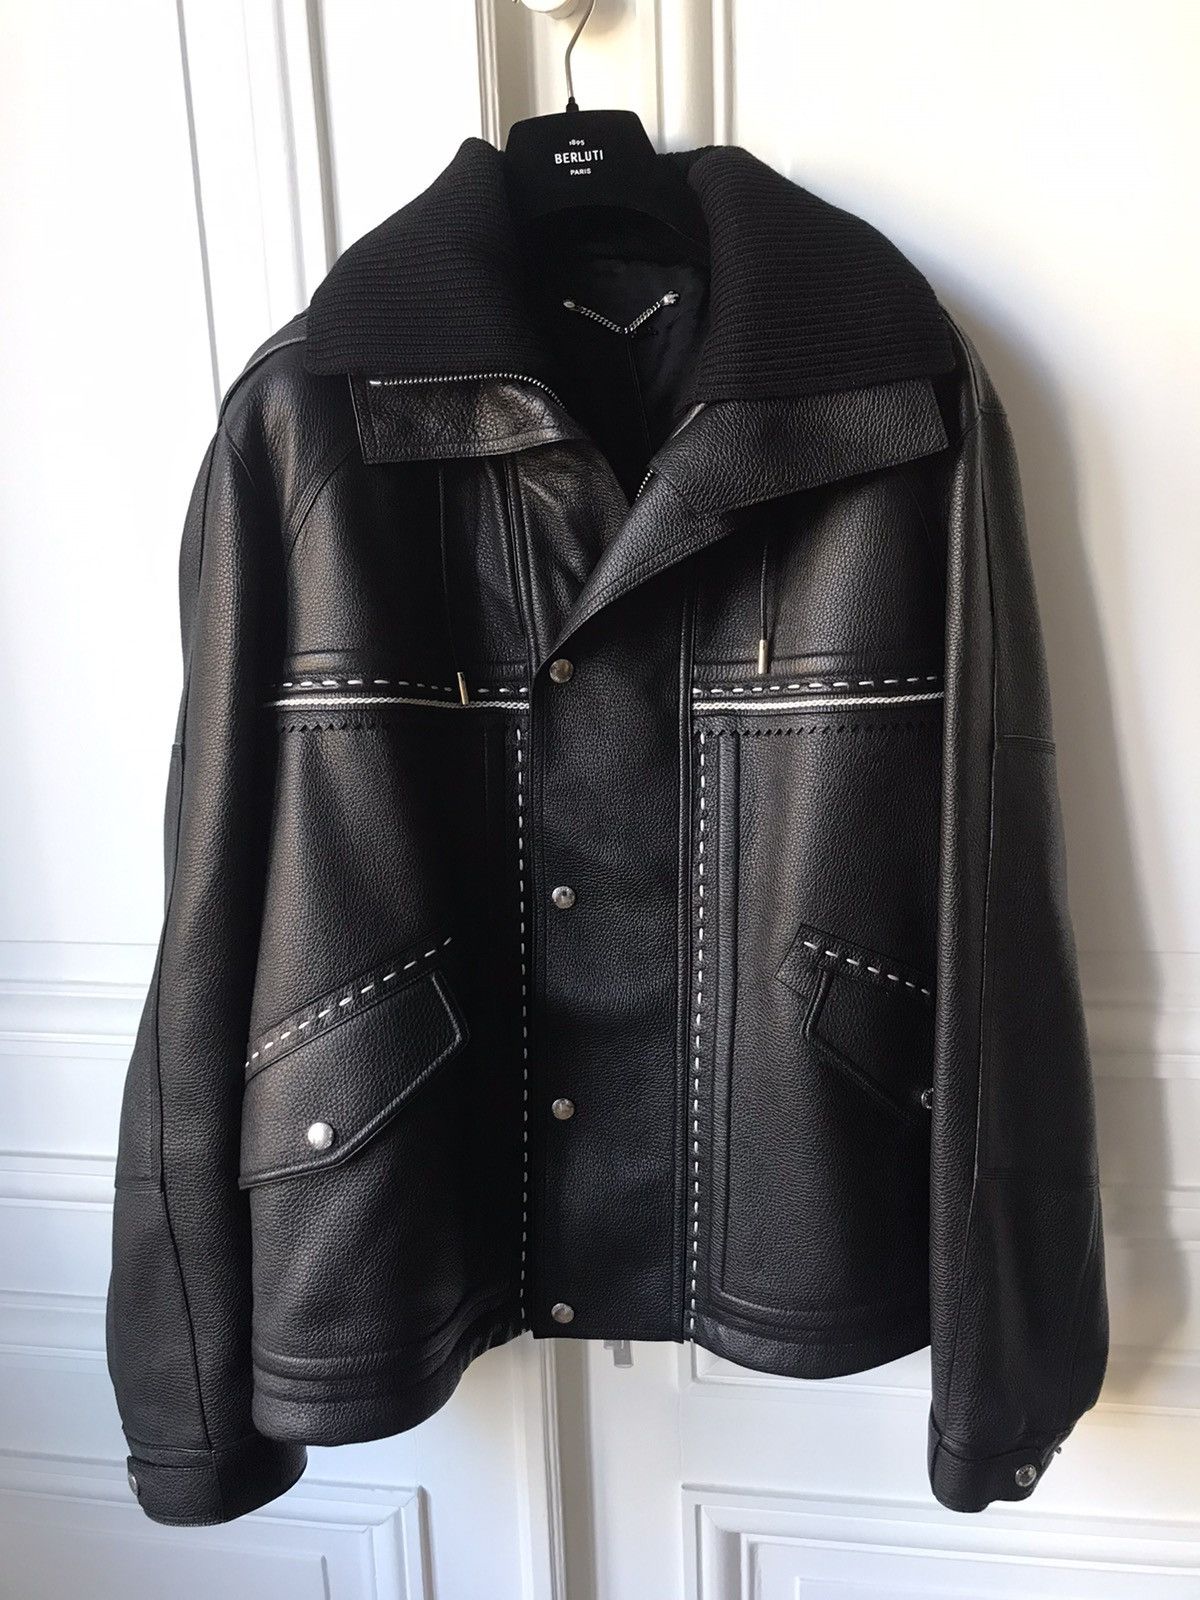 Berluti Berluti leather jacket new with tag | Grailed